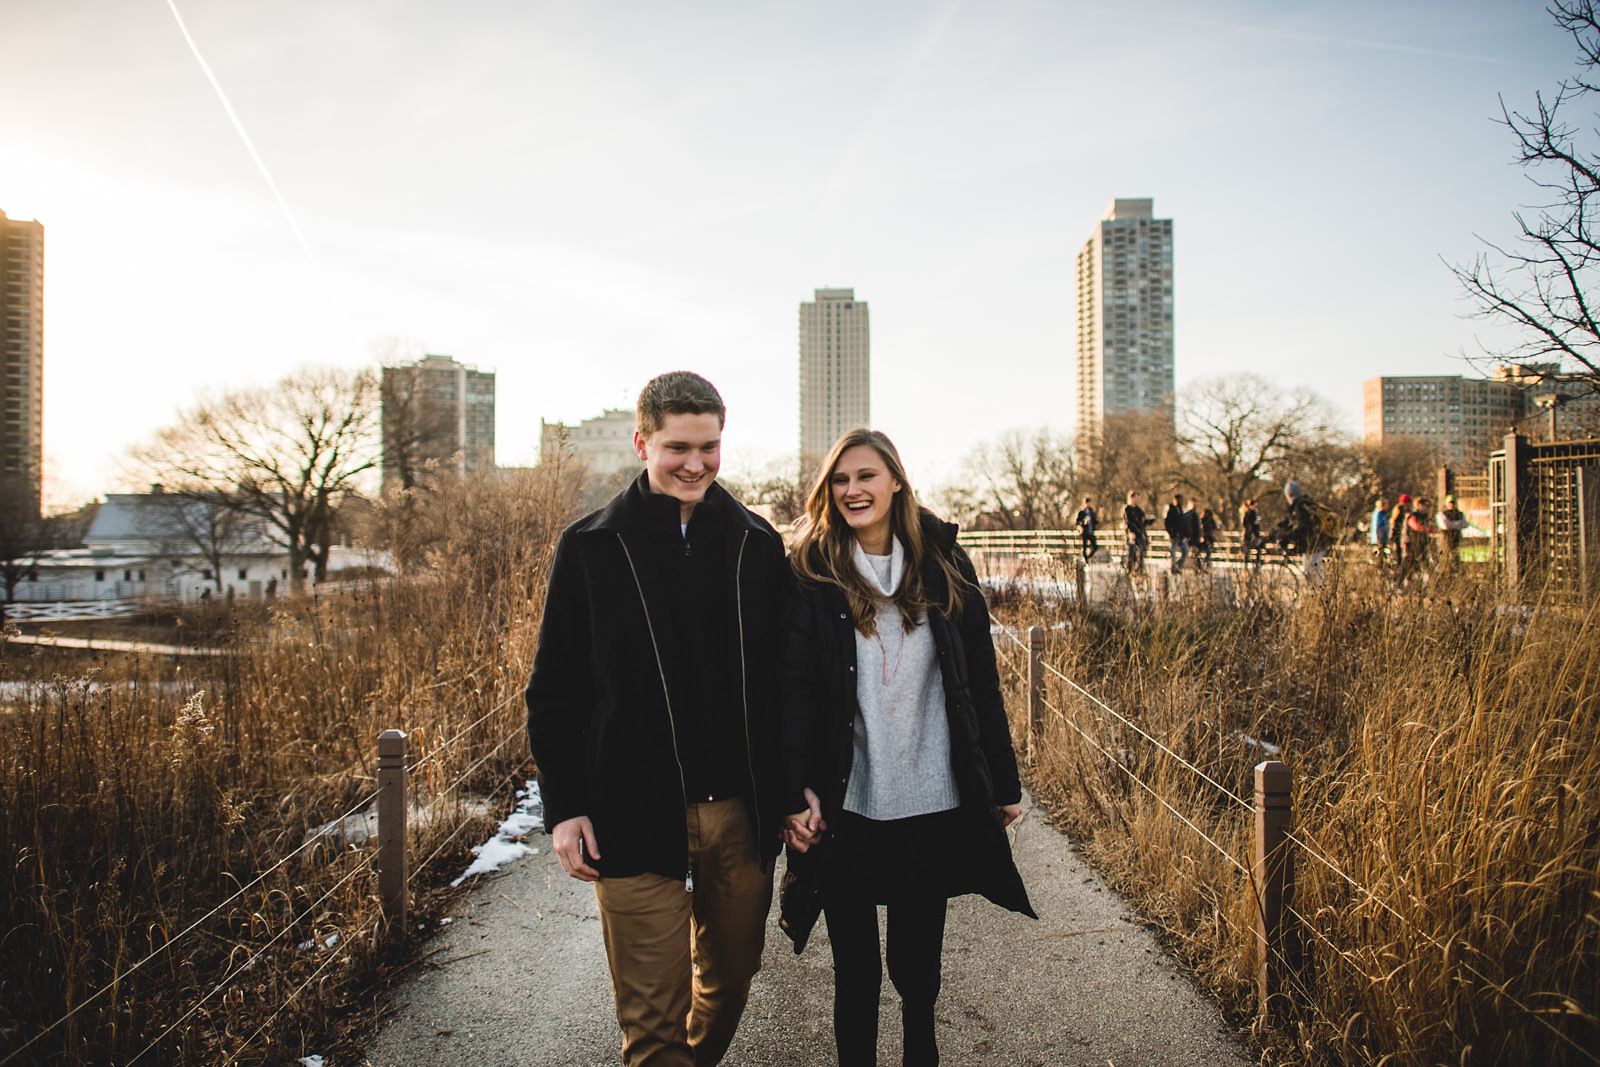 16 different engagement photos in chicago - Chicago Engagement Photos // Katie + Nick